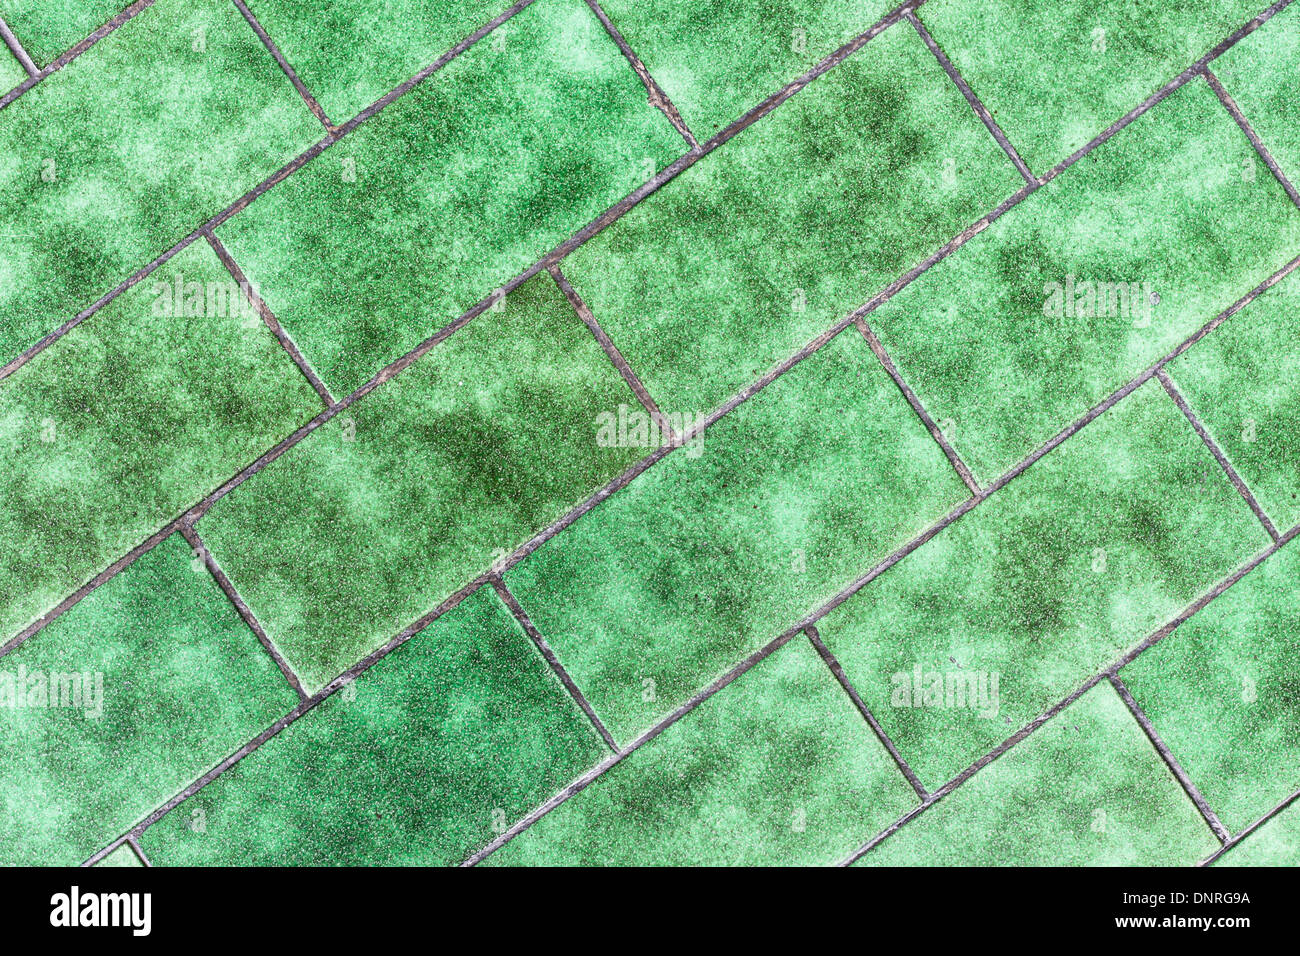 Mottled green tiles as a background image Stock Photo